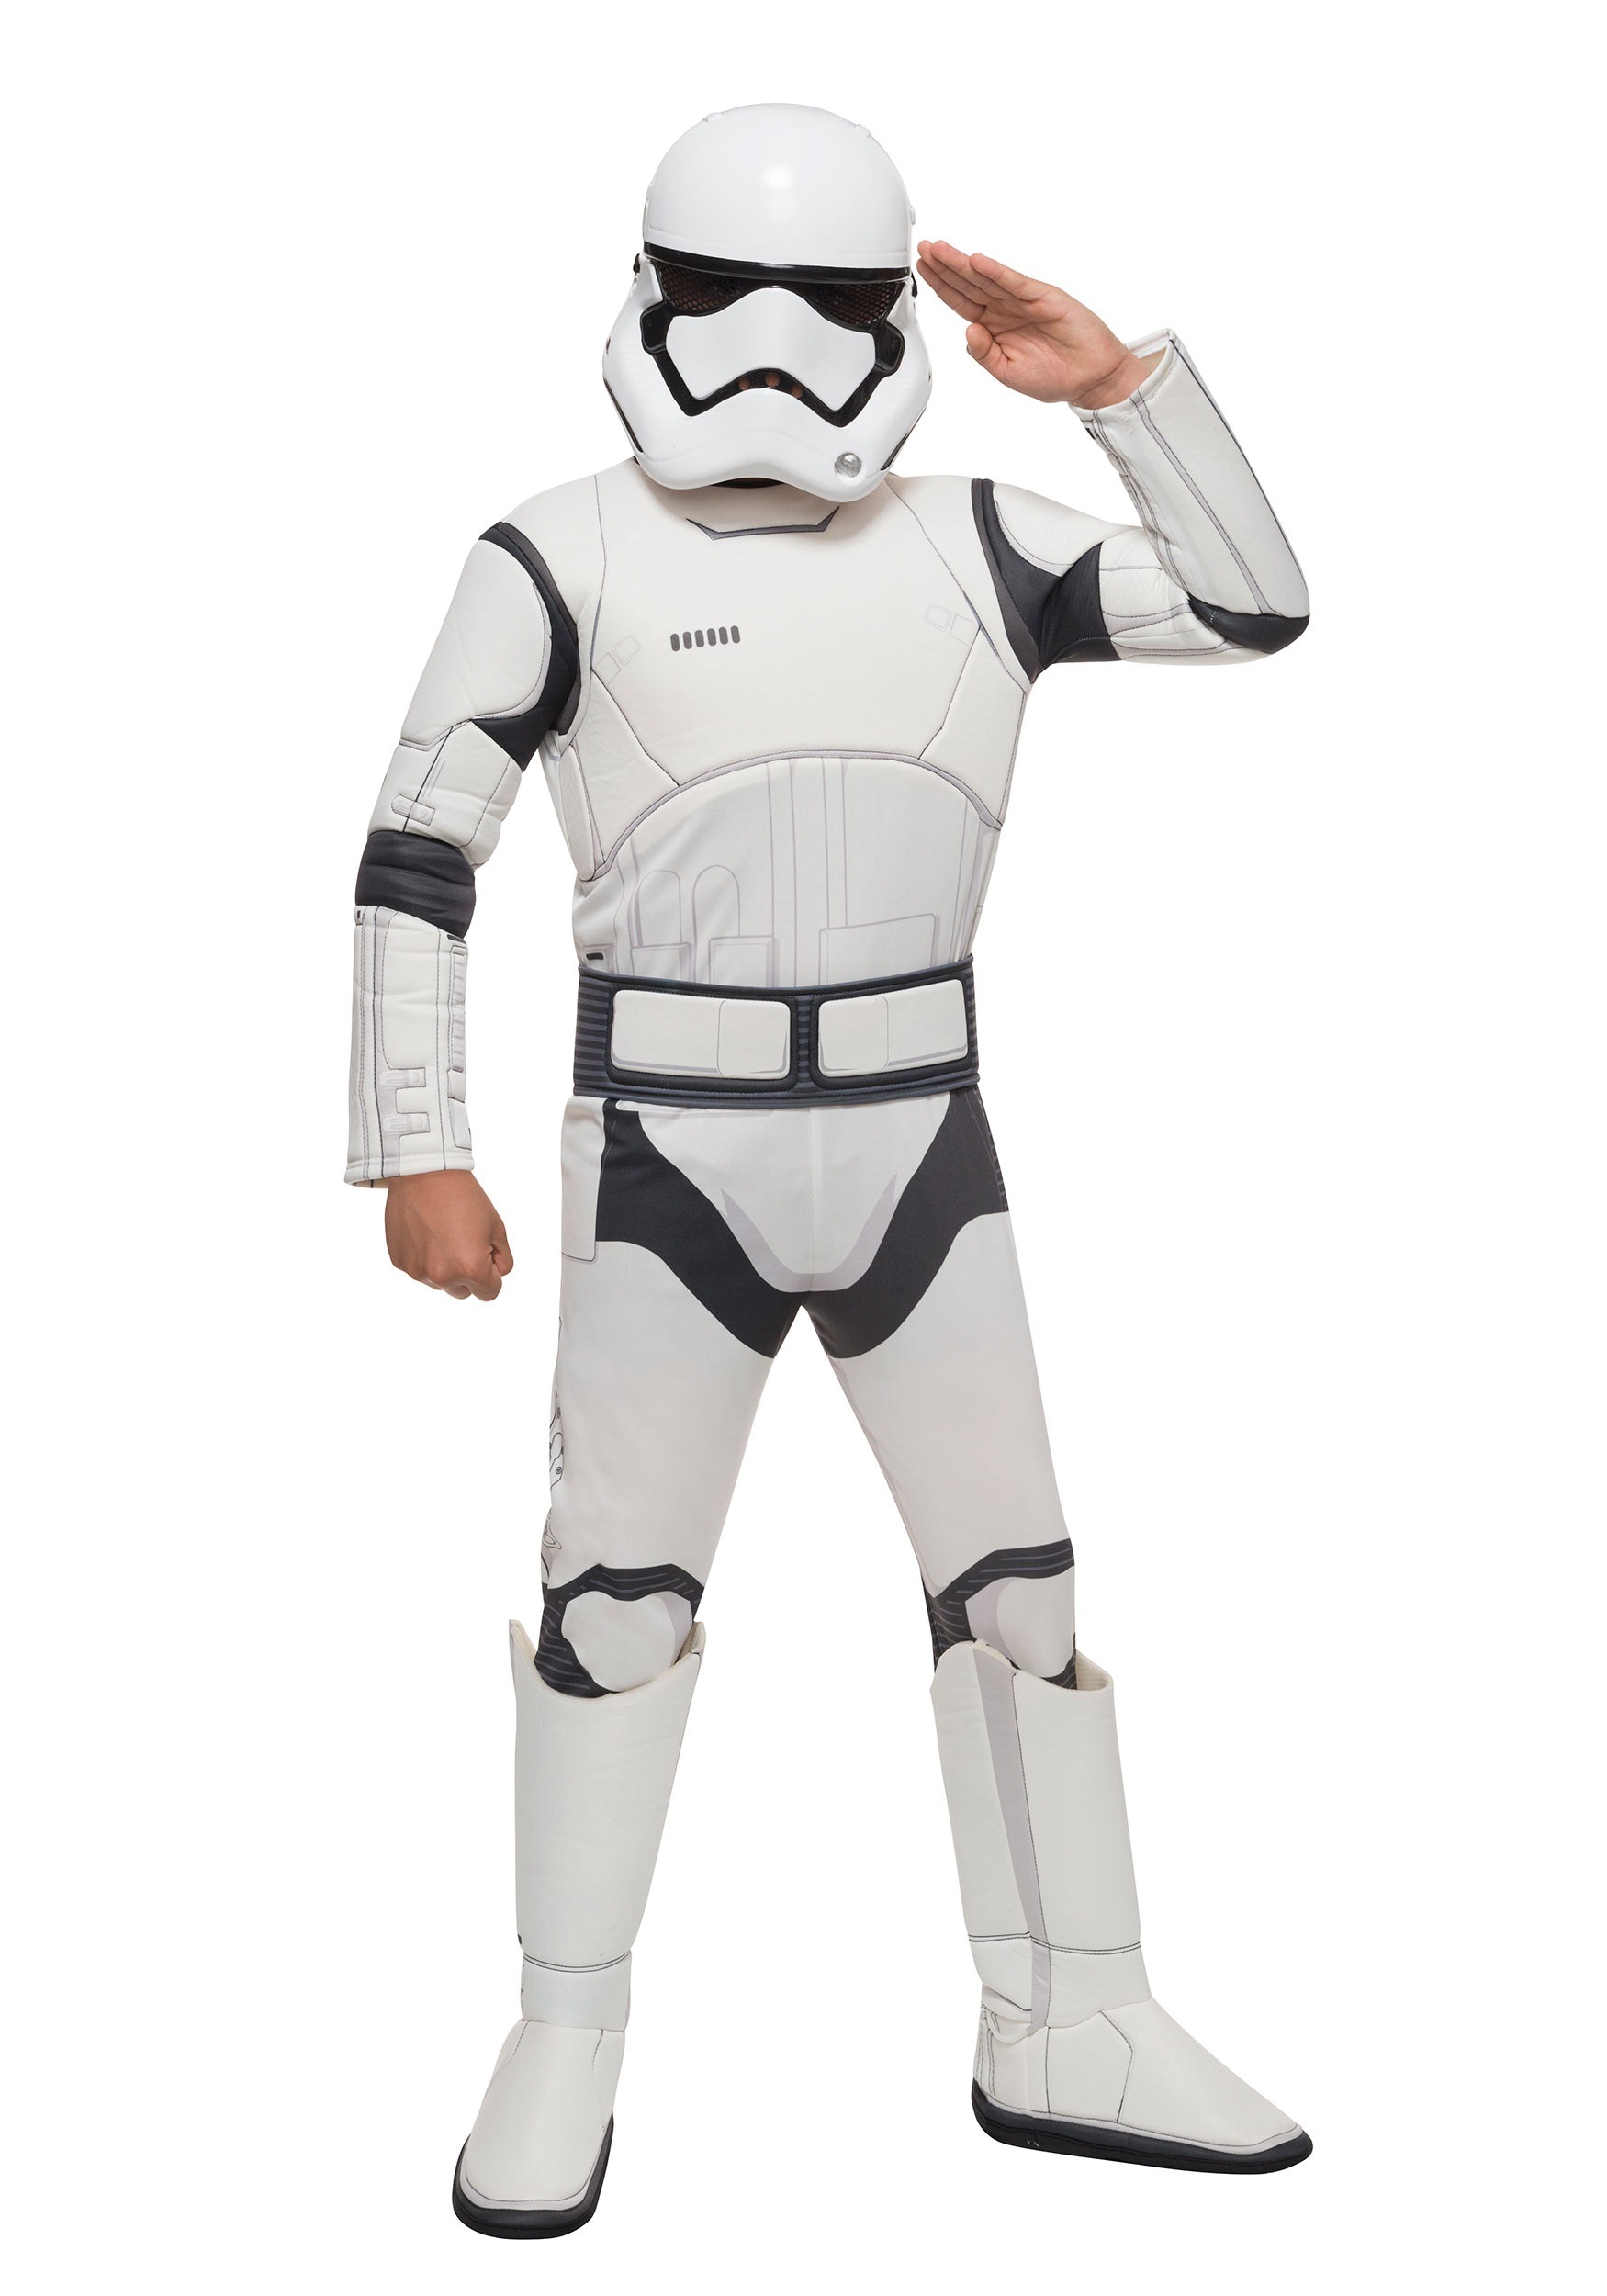 Star Wars The Force Awakens Deluxe Child Stormtrooper Disfrave Multicolor